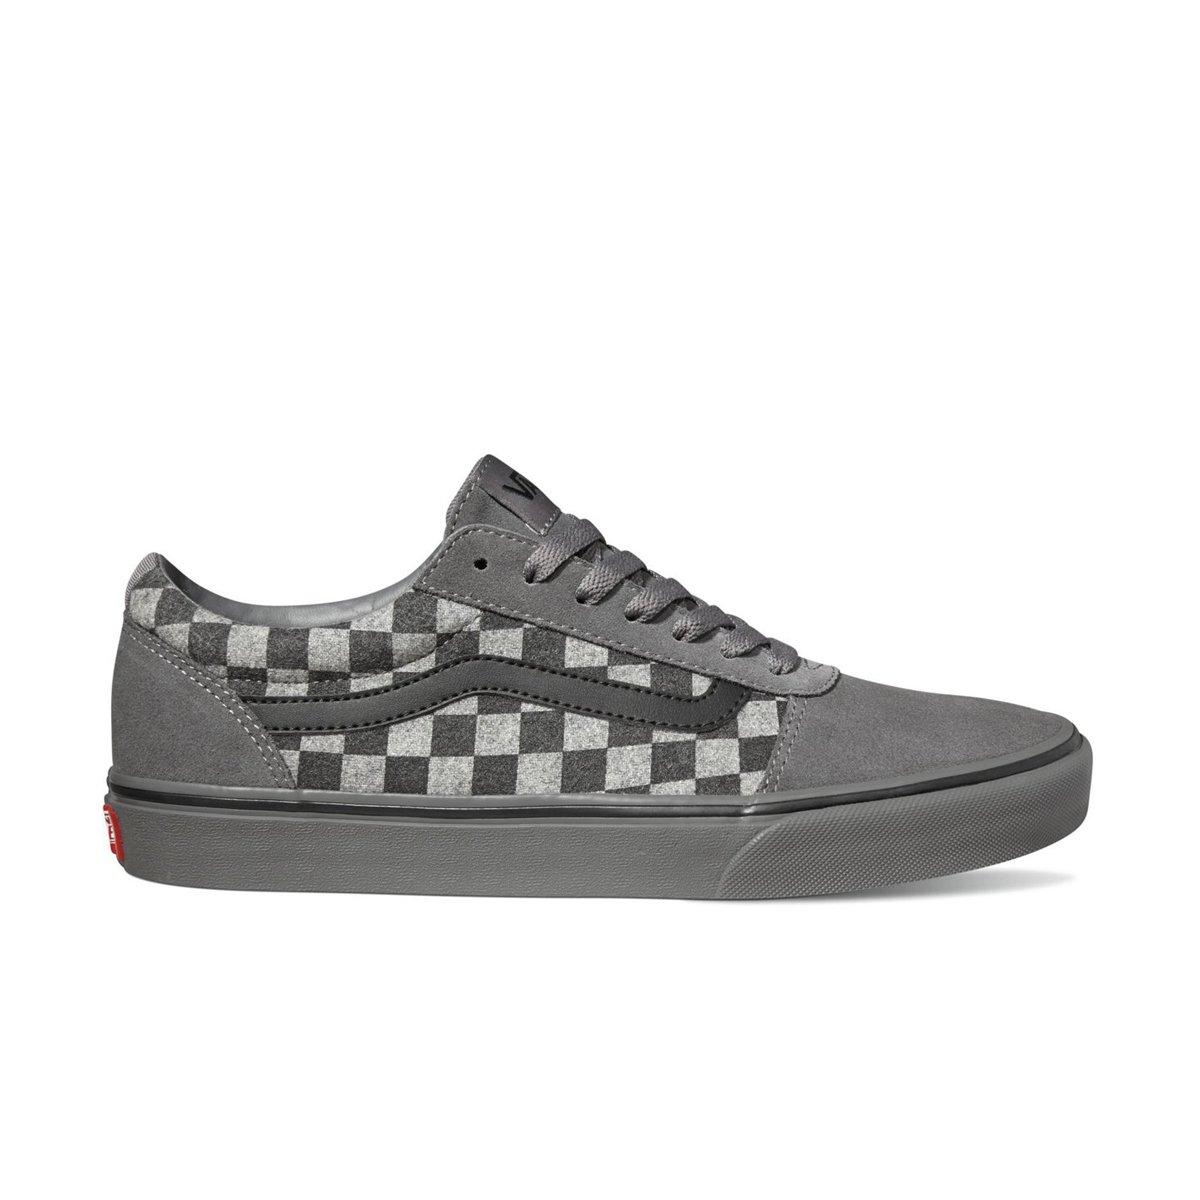 i put on my checkerboard vans and the nearest sweatshirt